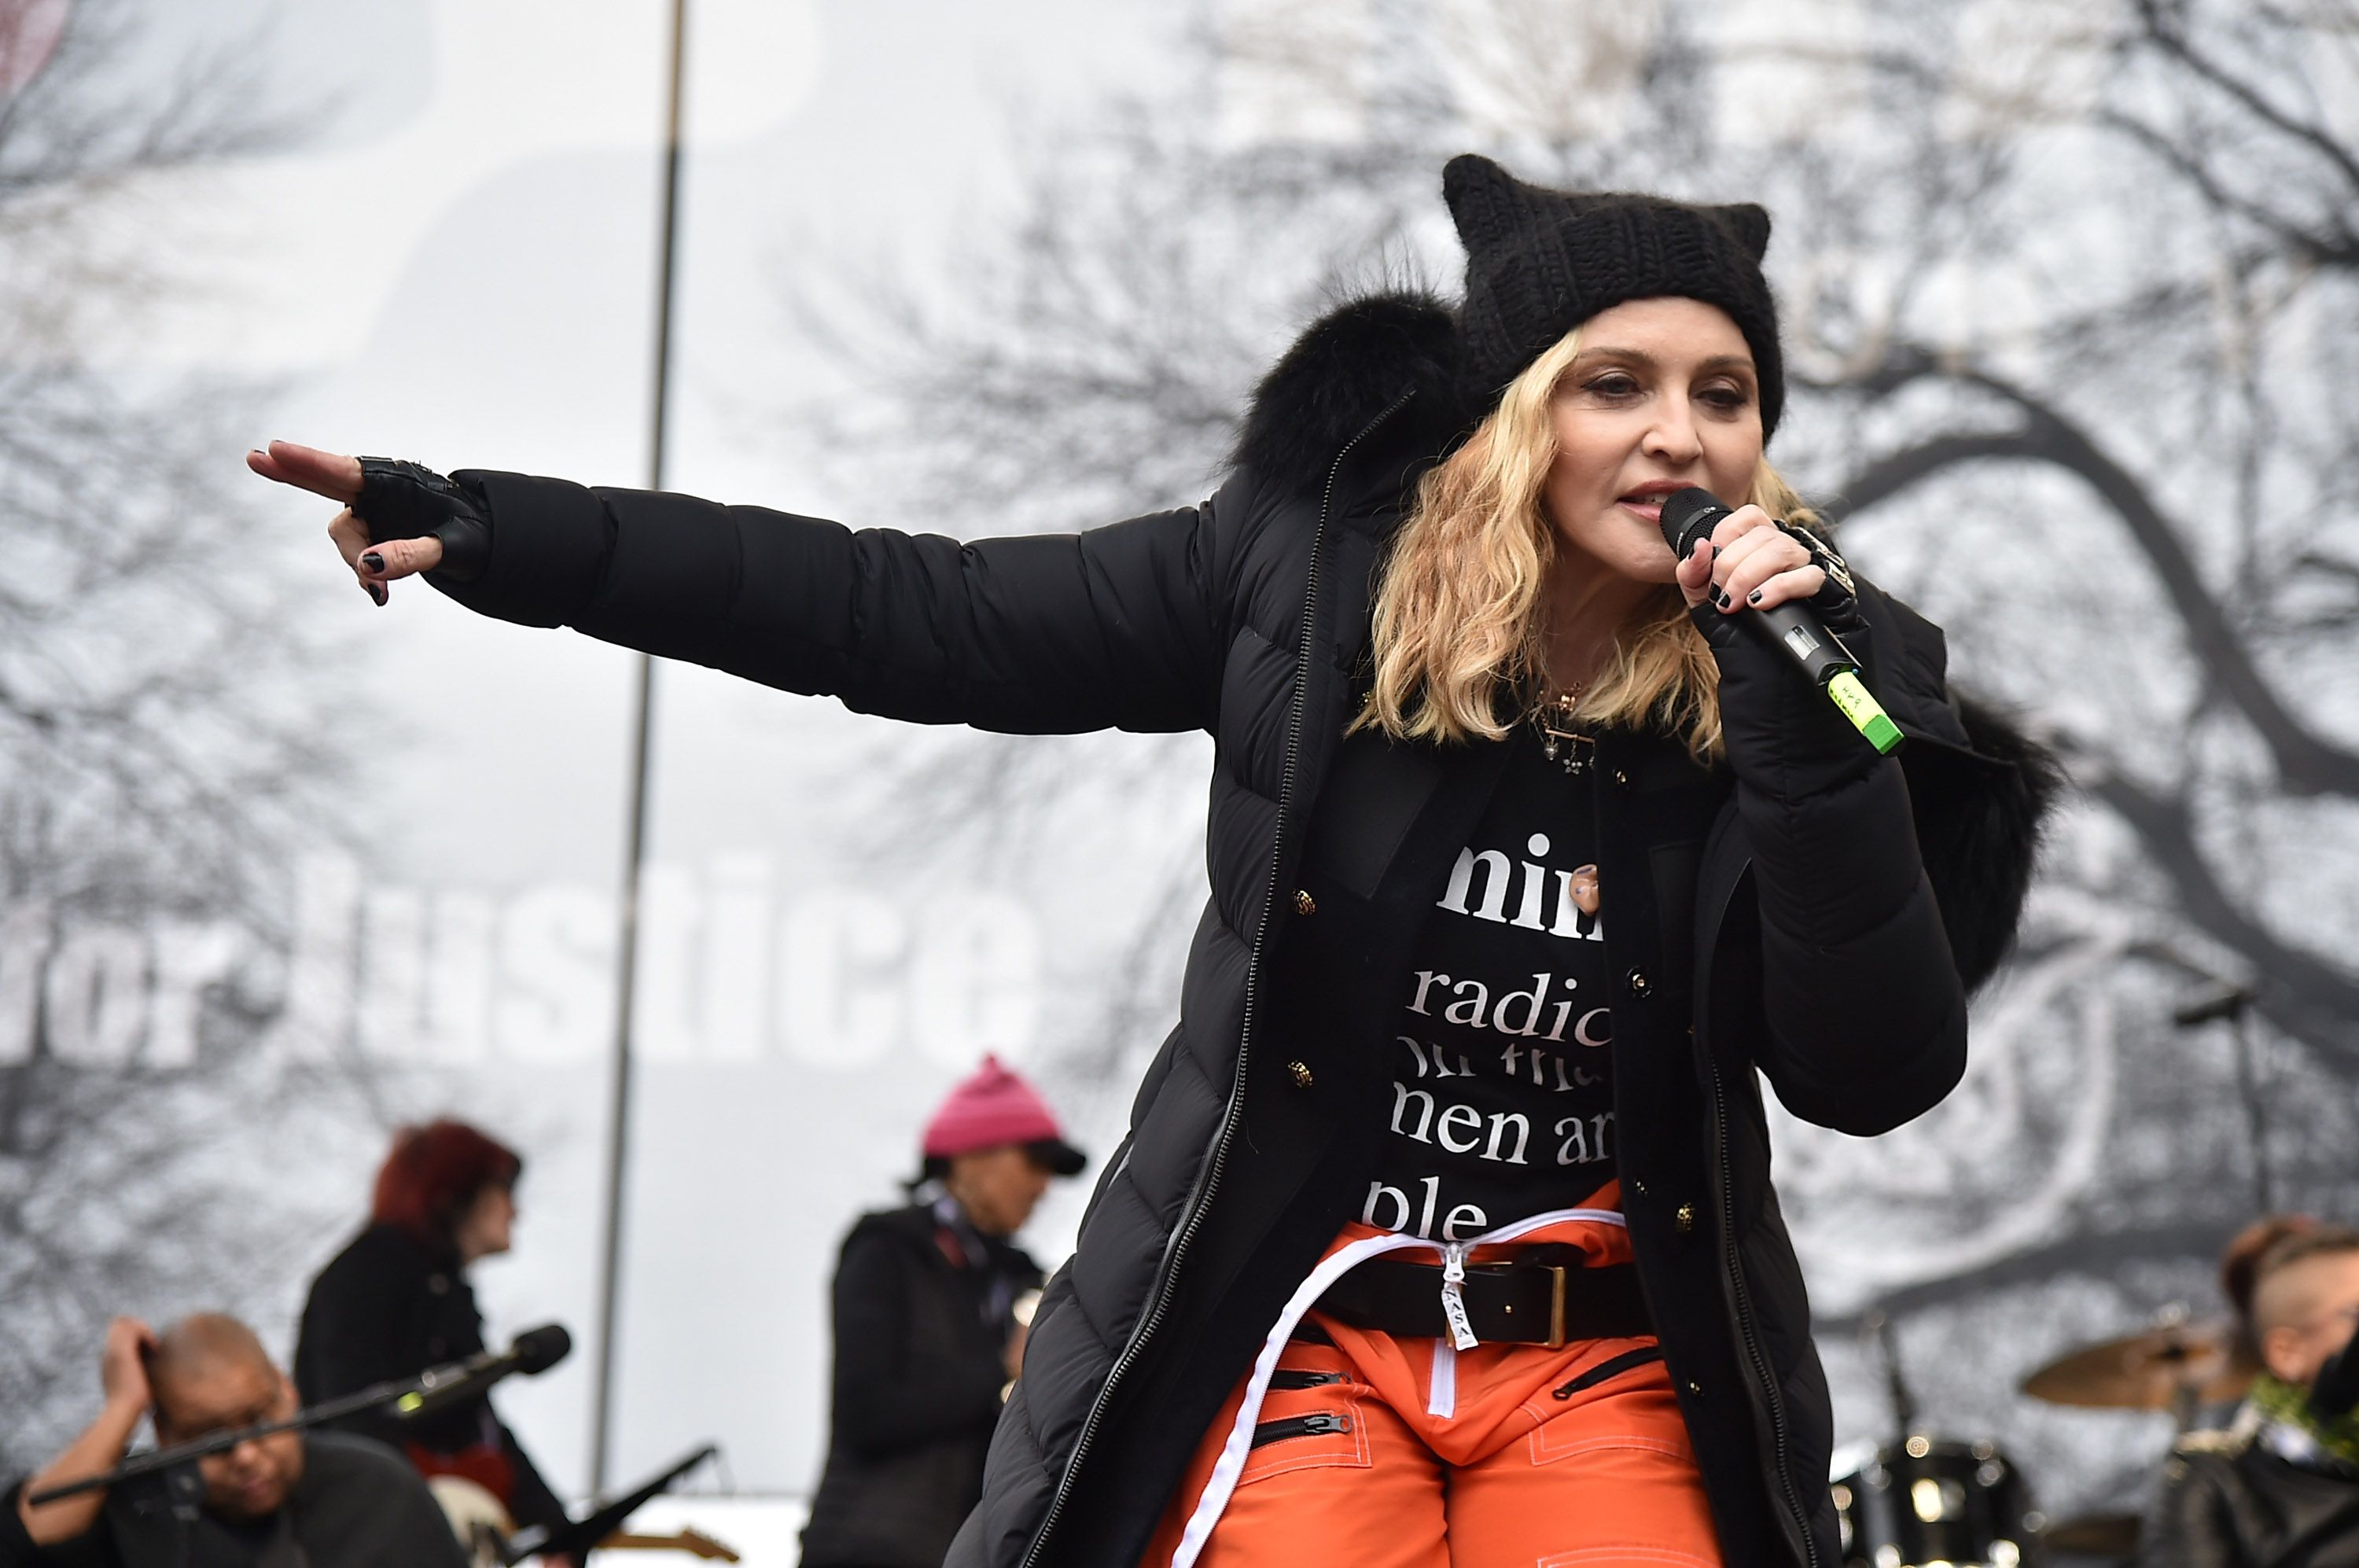 Madonna at the Women's March on Washington on January 21, 2017 | Photo: Getty Images